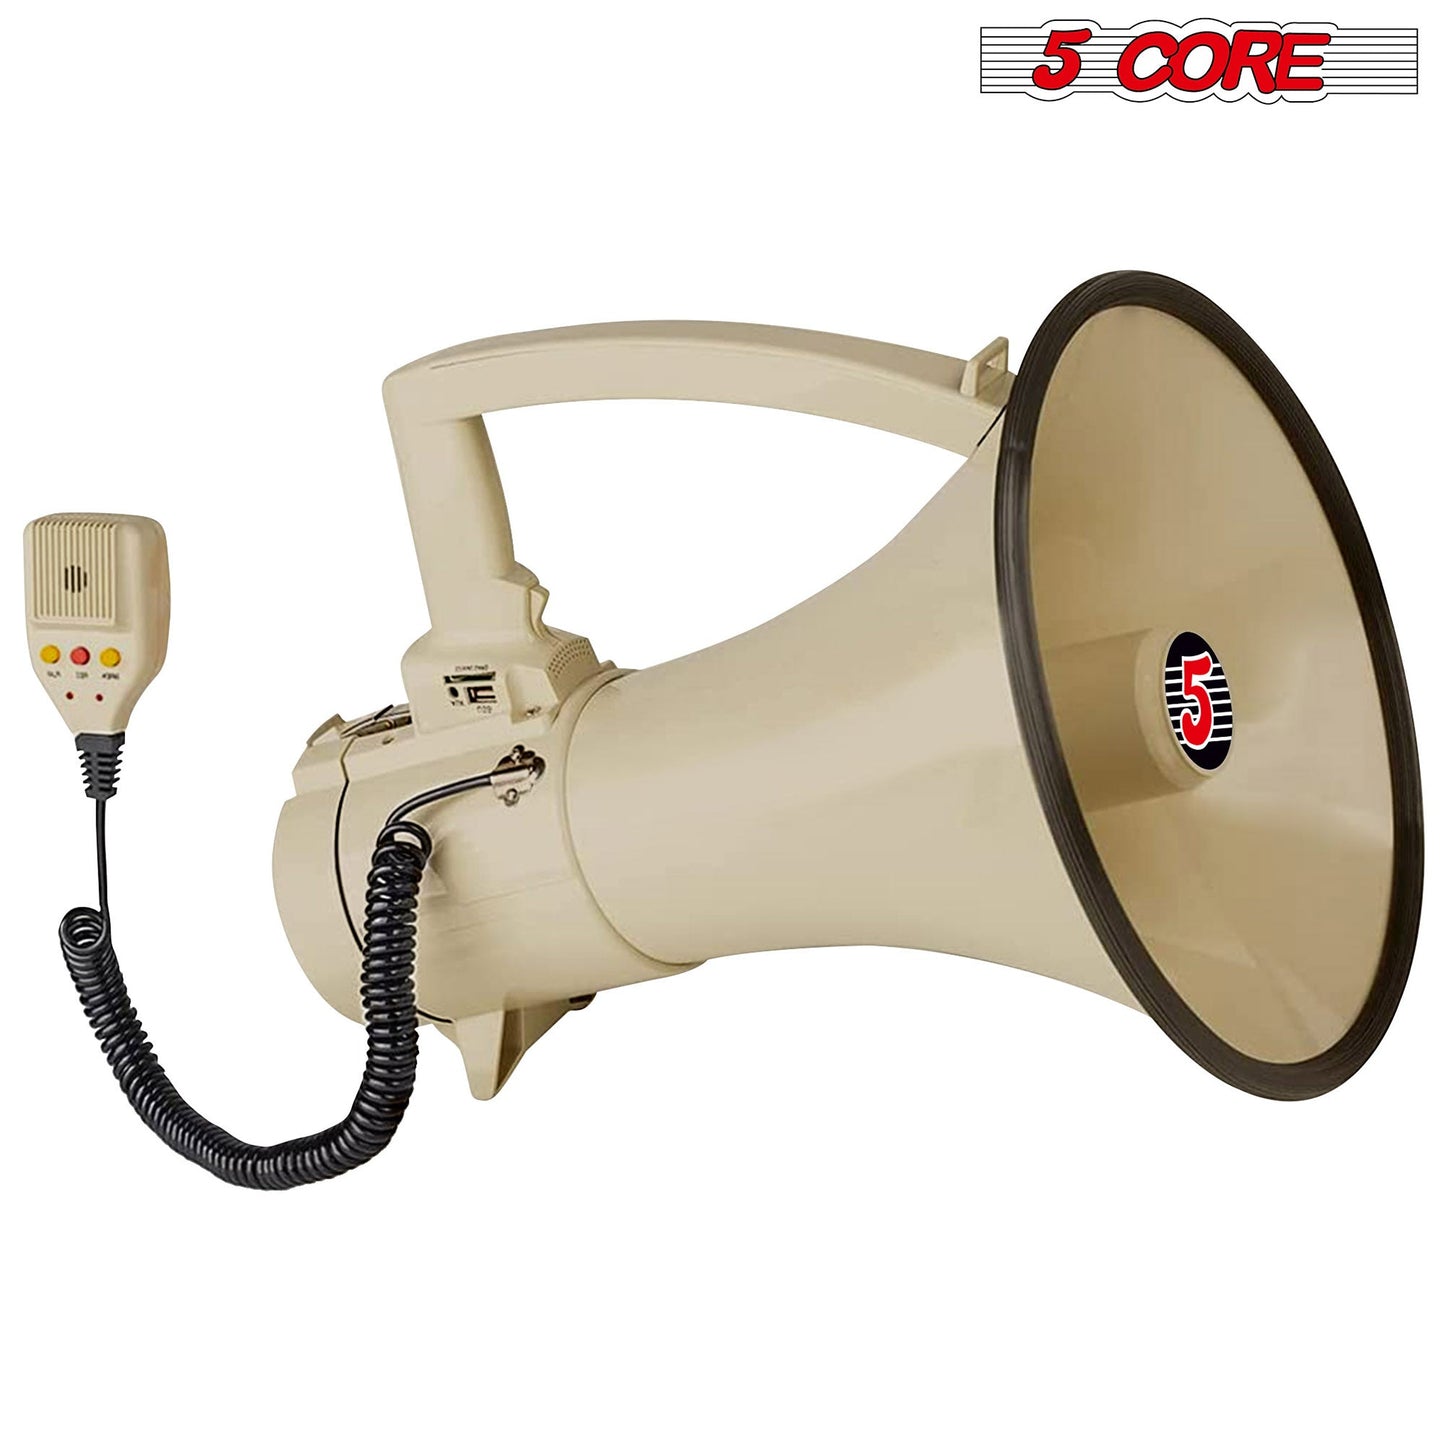 Professional Megaphone | 70W PMPO Bull Horn for Clear Sound with Ergonomic Grip| Multi-Function with Talk, Siren, Record| USB, SD, AUX Input| Handheld Mic Indoor & Outdoor Use- 3501 USB